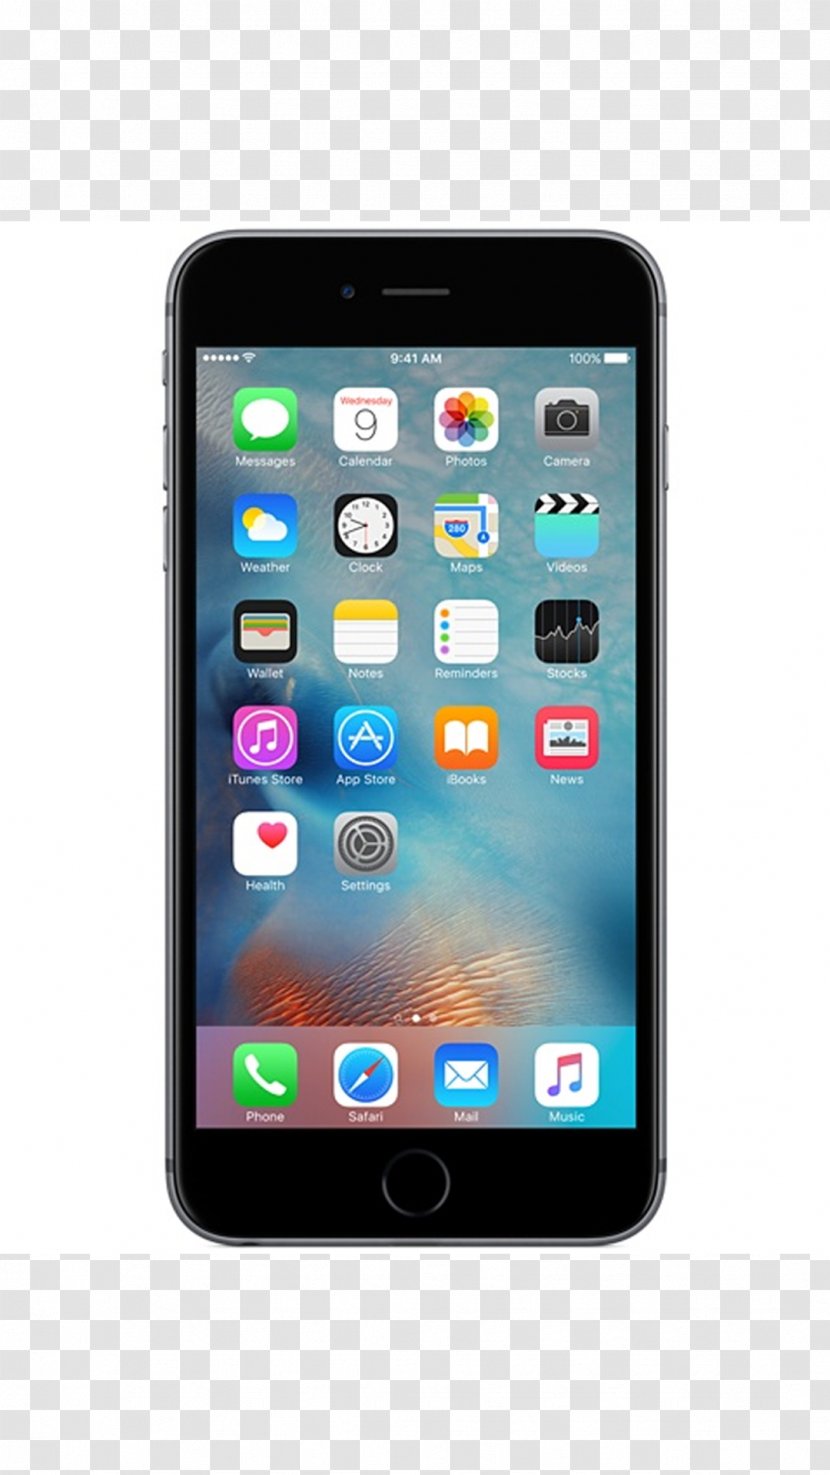 IPhone 6 Plus App Store Sideloading Telephone - Ios 9 - Apple Iphone Transparent PNG